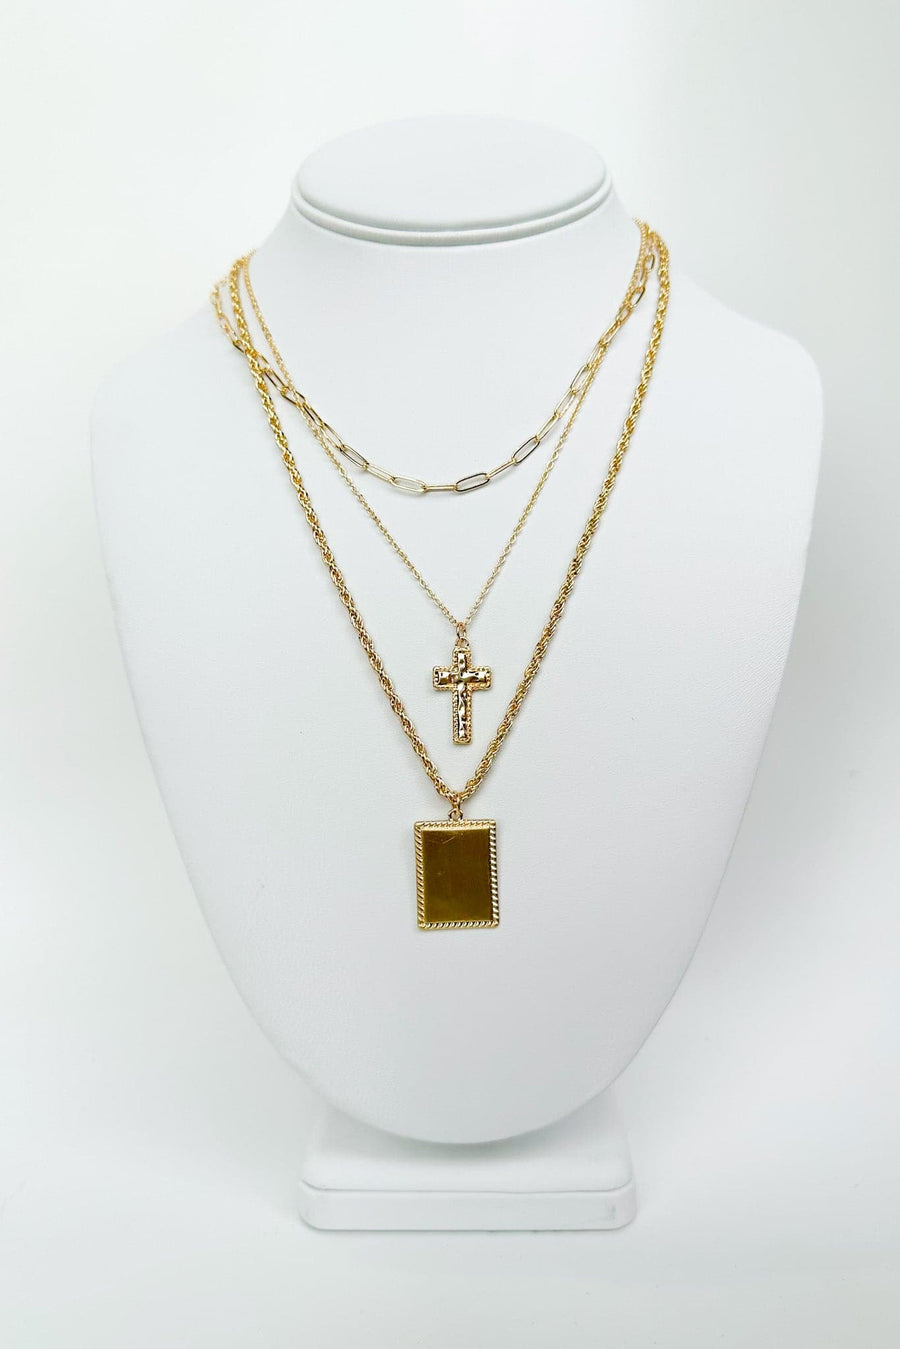 Gold Alluring Admiration Cross and Tag Layered Necklace - kitchencabinetmagic